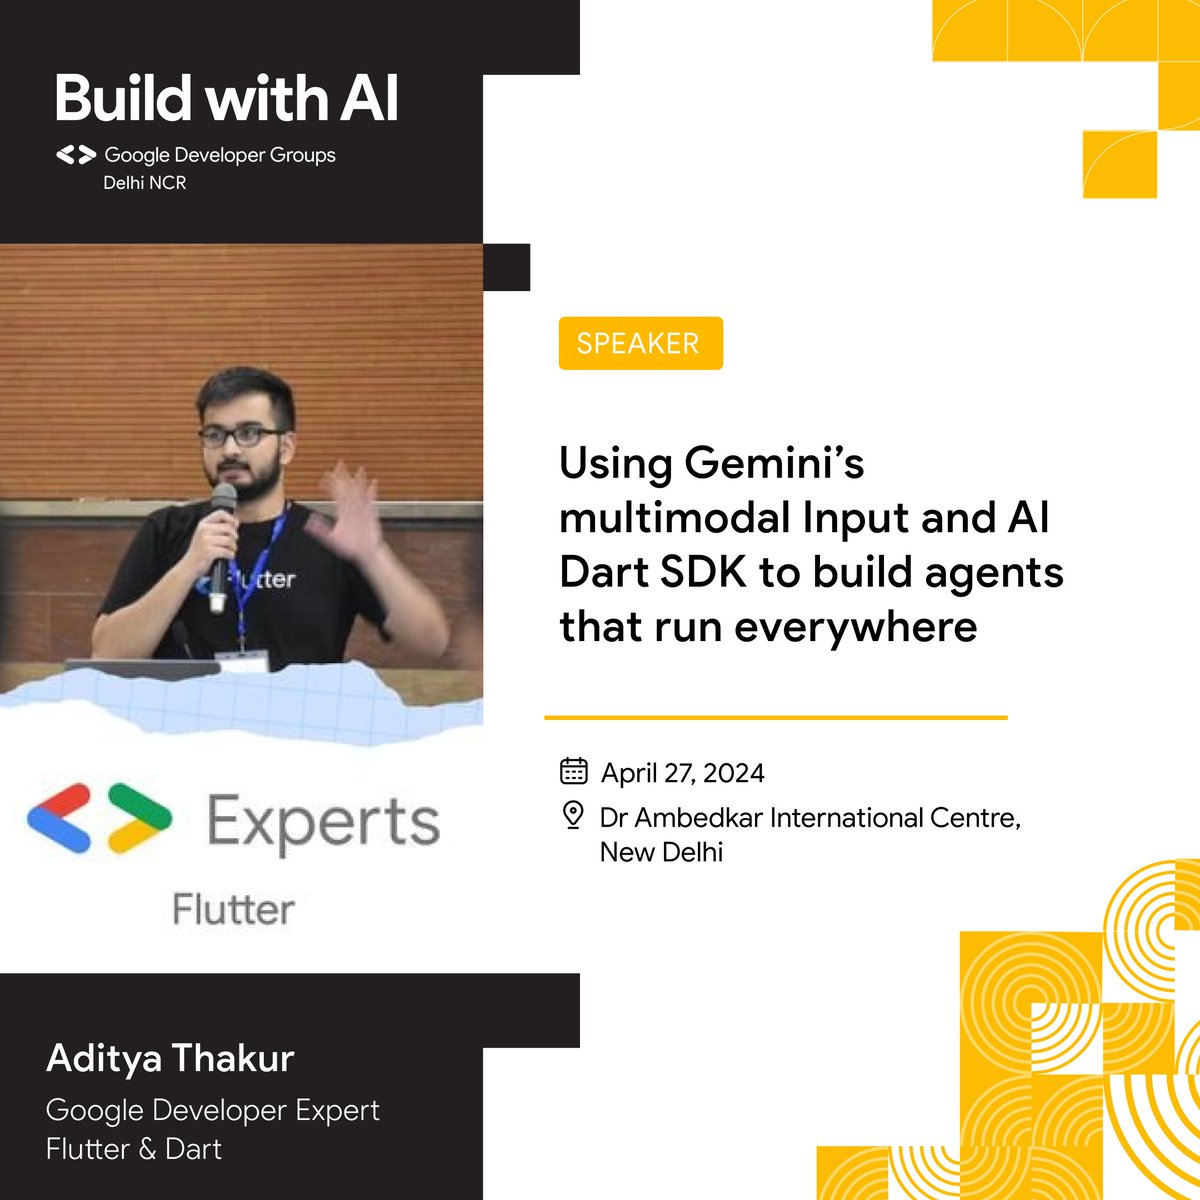 Aditya Thakur - AI Agents Everywhere: Alright devs, buckle up! 🚀 Aditya Thakur, a certified Flutter/Dart Google Expert, is about to take us to the bleeding edge of AI by revealing how to build intelligent agents using Gemini's multimodal capabilities and the AI Dart SDK.